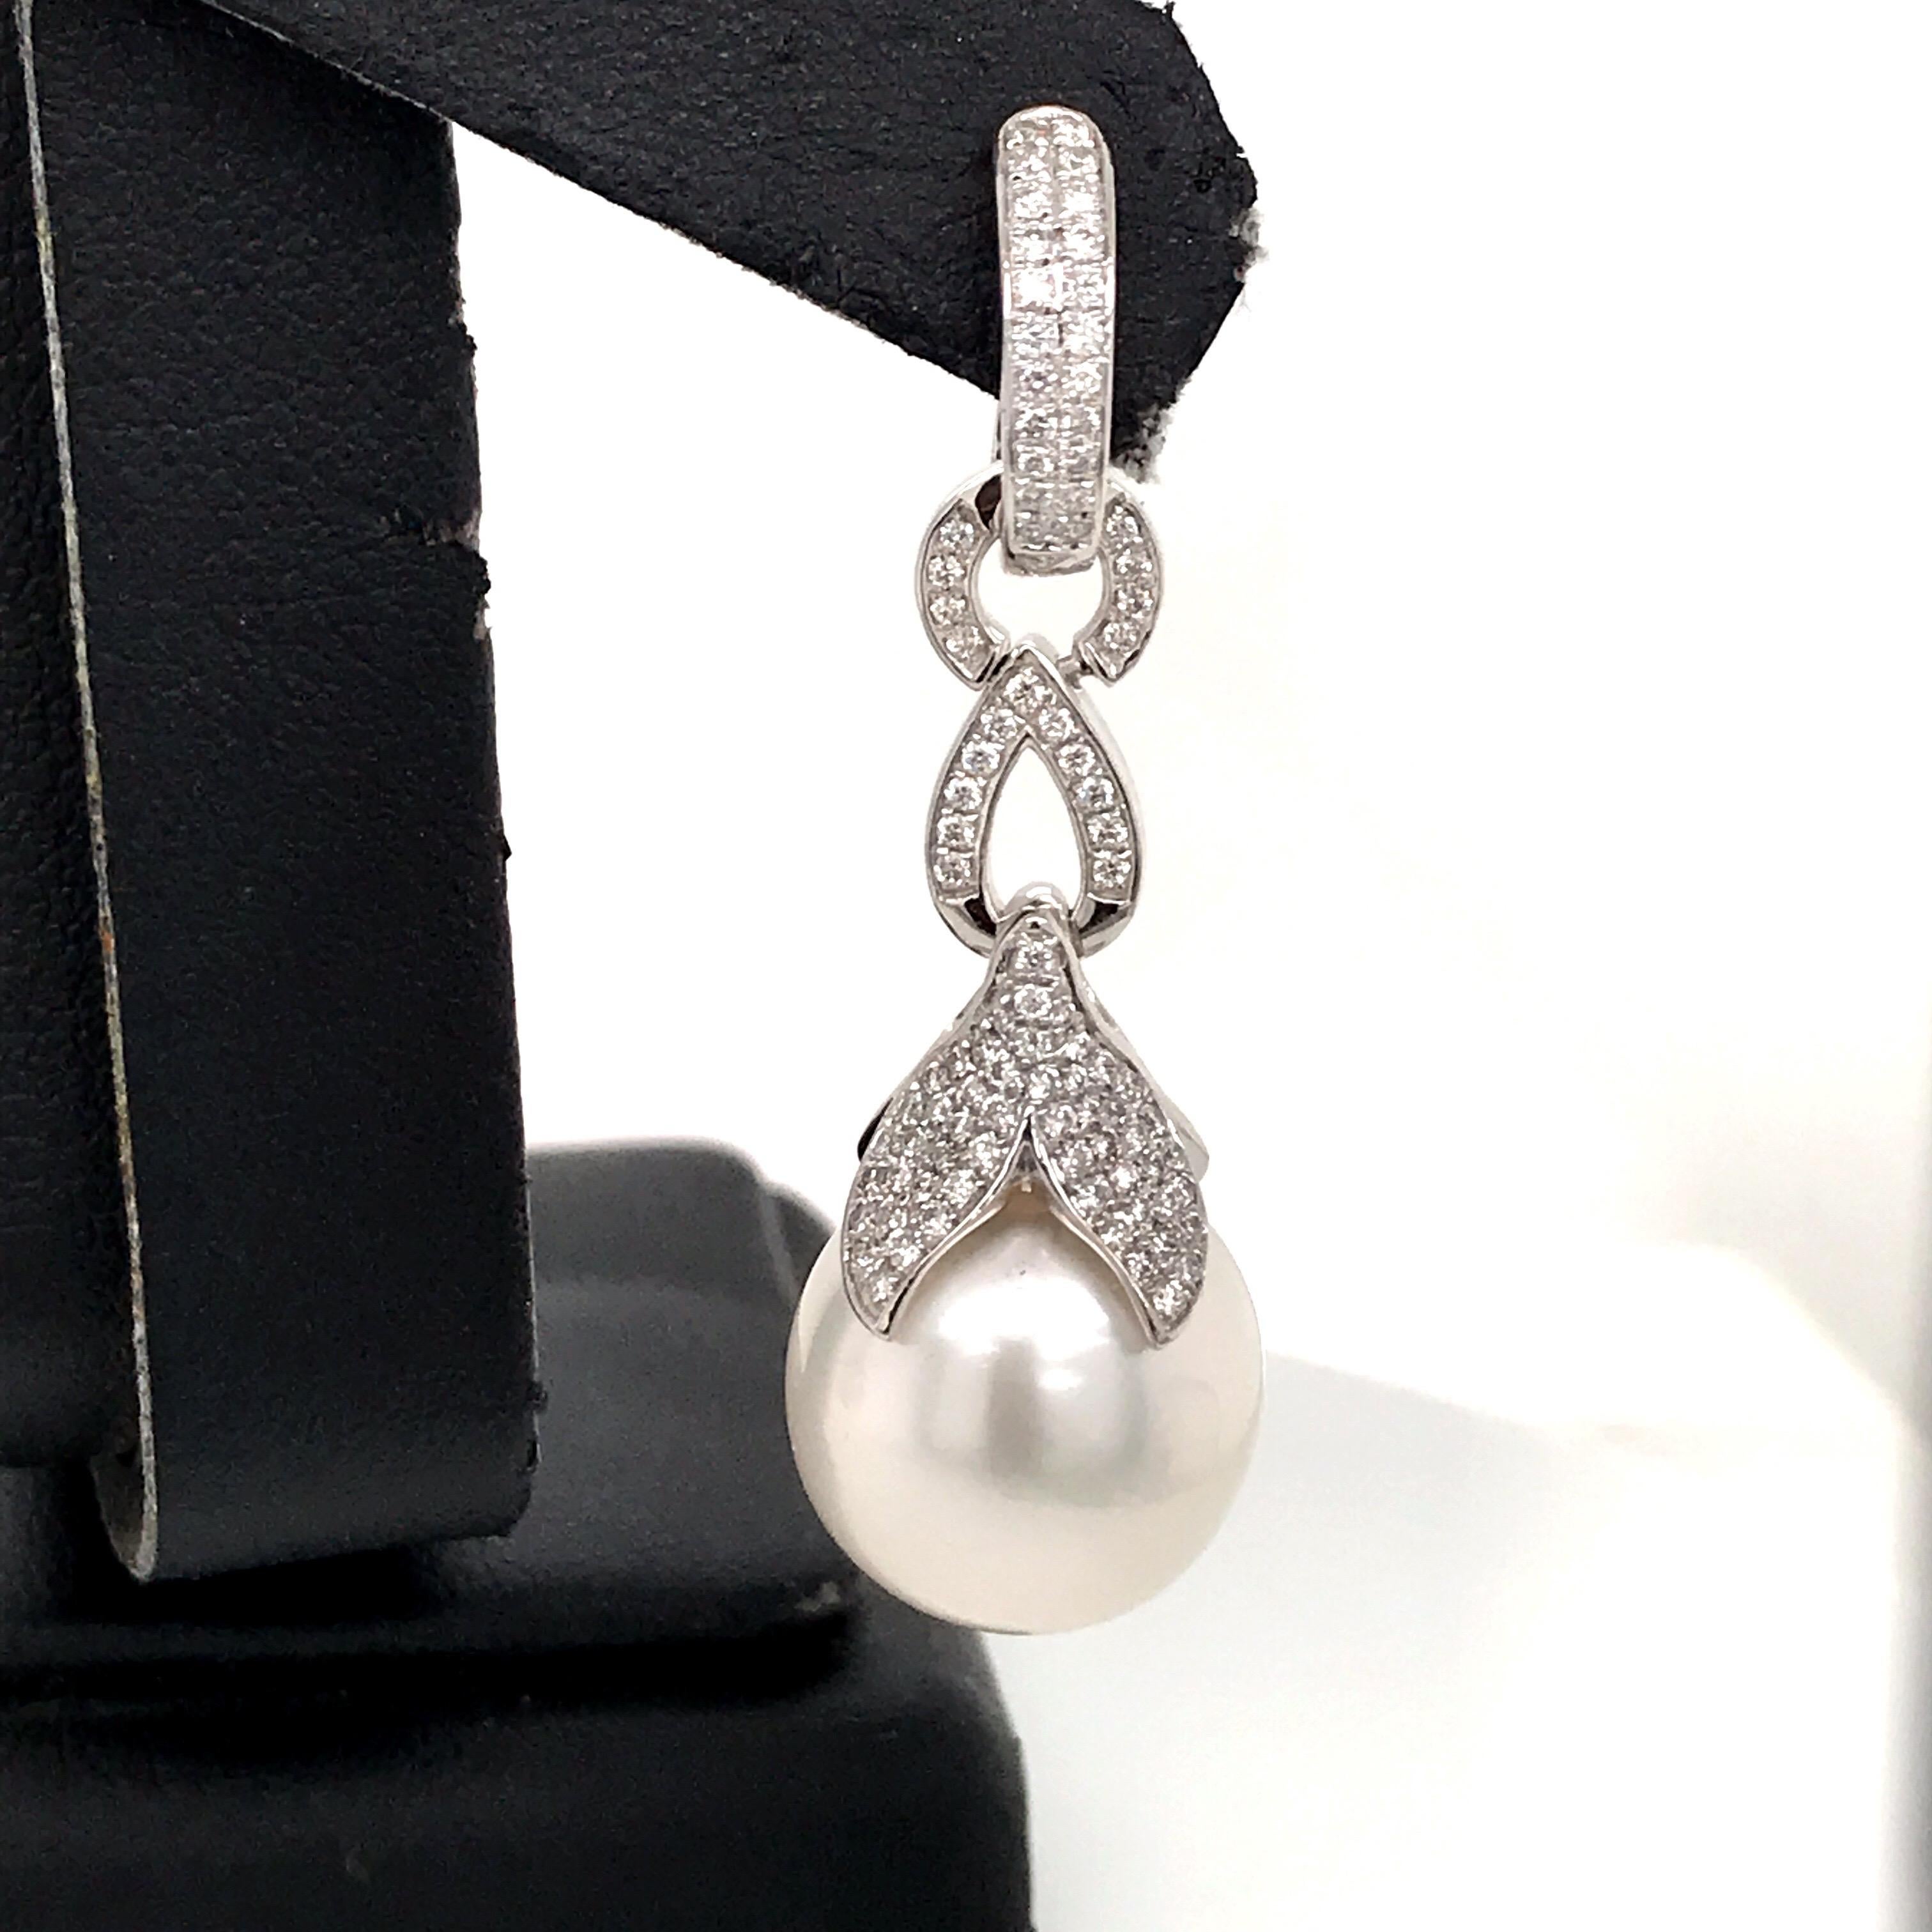 18K White gold drop earrings featuring two South Sea Pearls 13-14 MM WITH 188 round brilliants 0.77 carats. 
Color G-H
Clarity SI